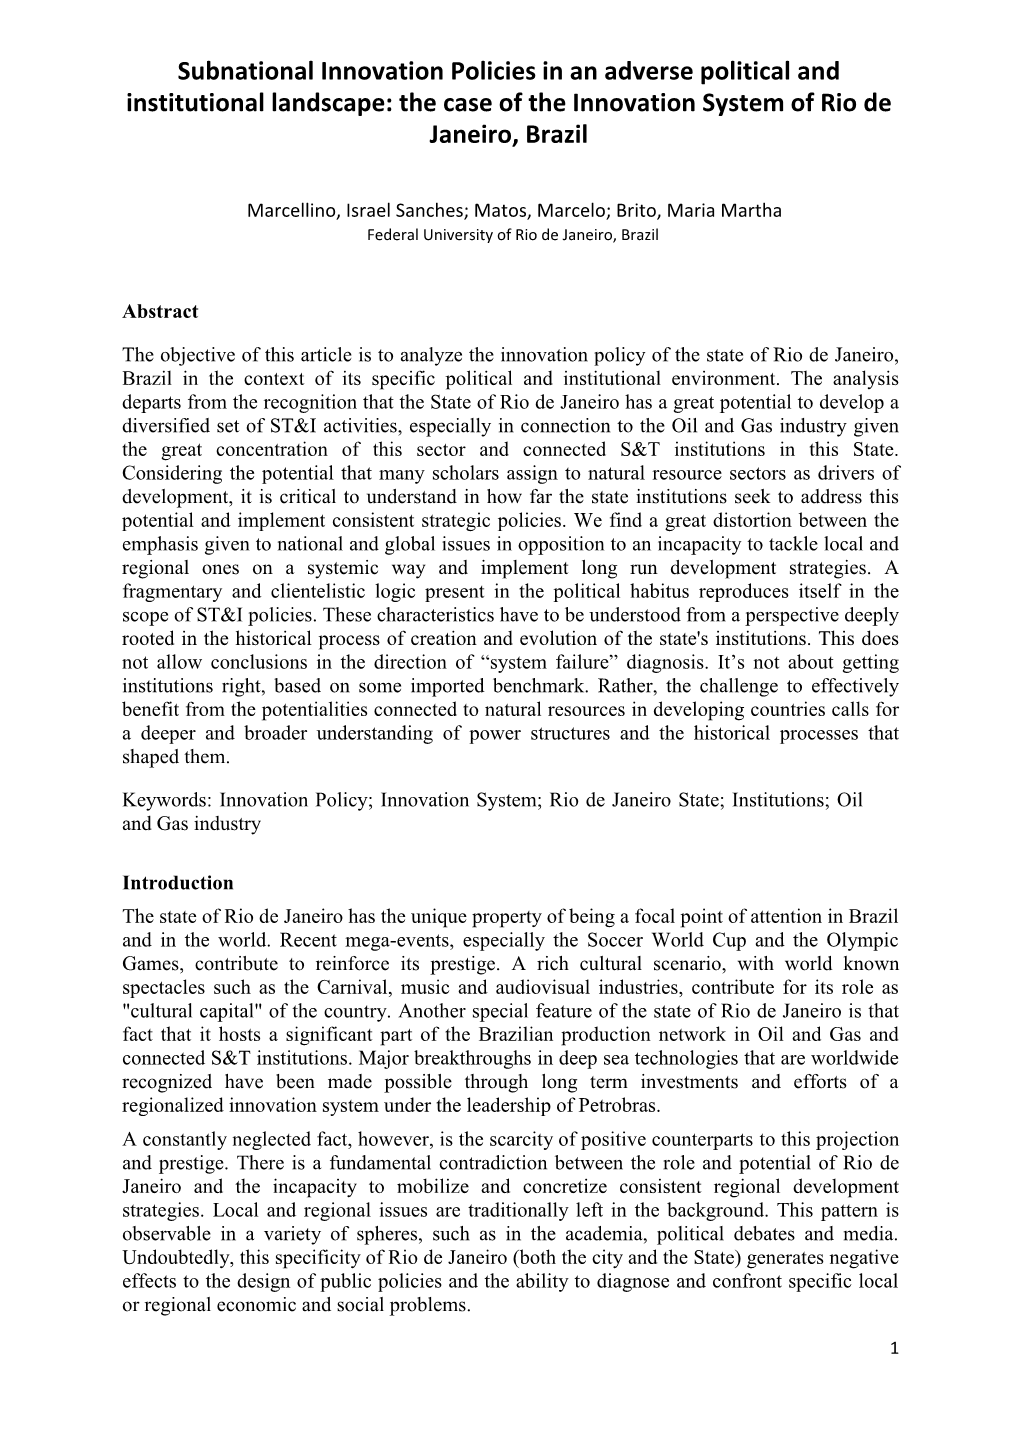 Subnational Innovation Policies in an Adverse Political and Institutional Landscape: the Case of the Innovation System of Rio De Janeiro, Brazil